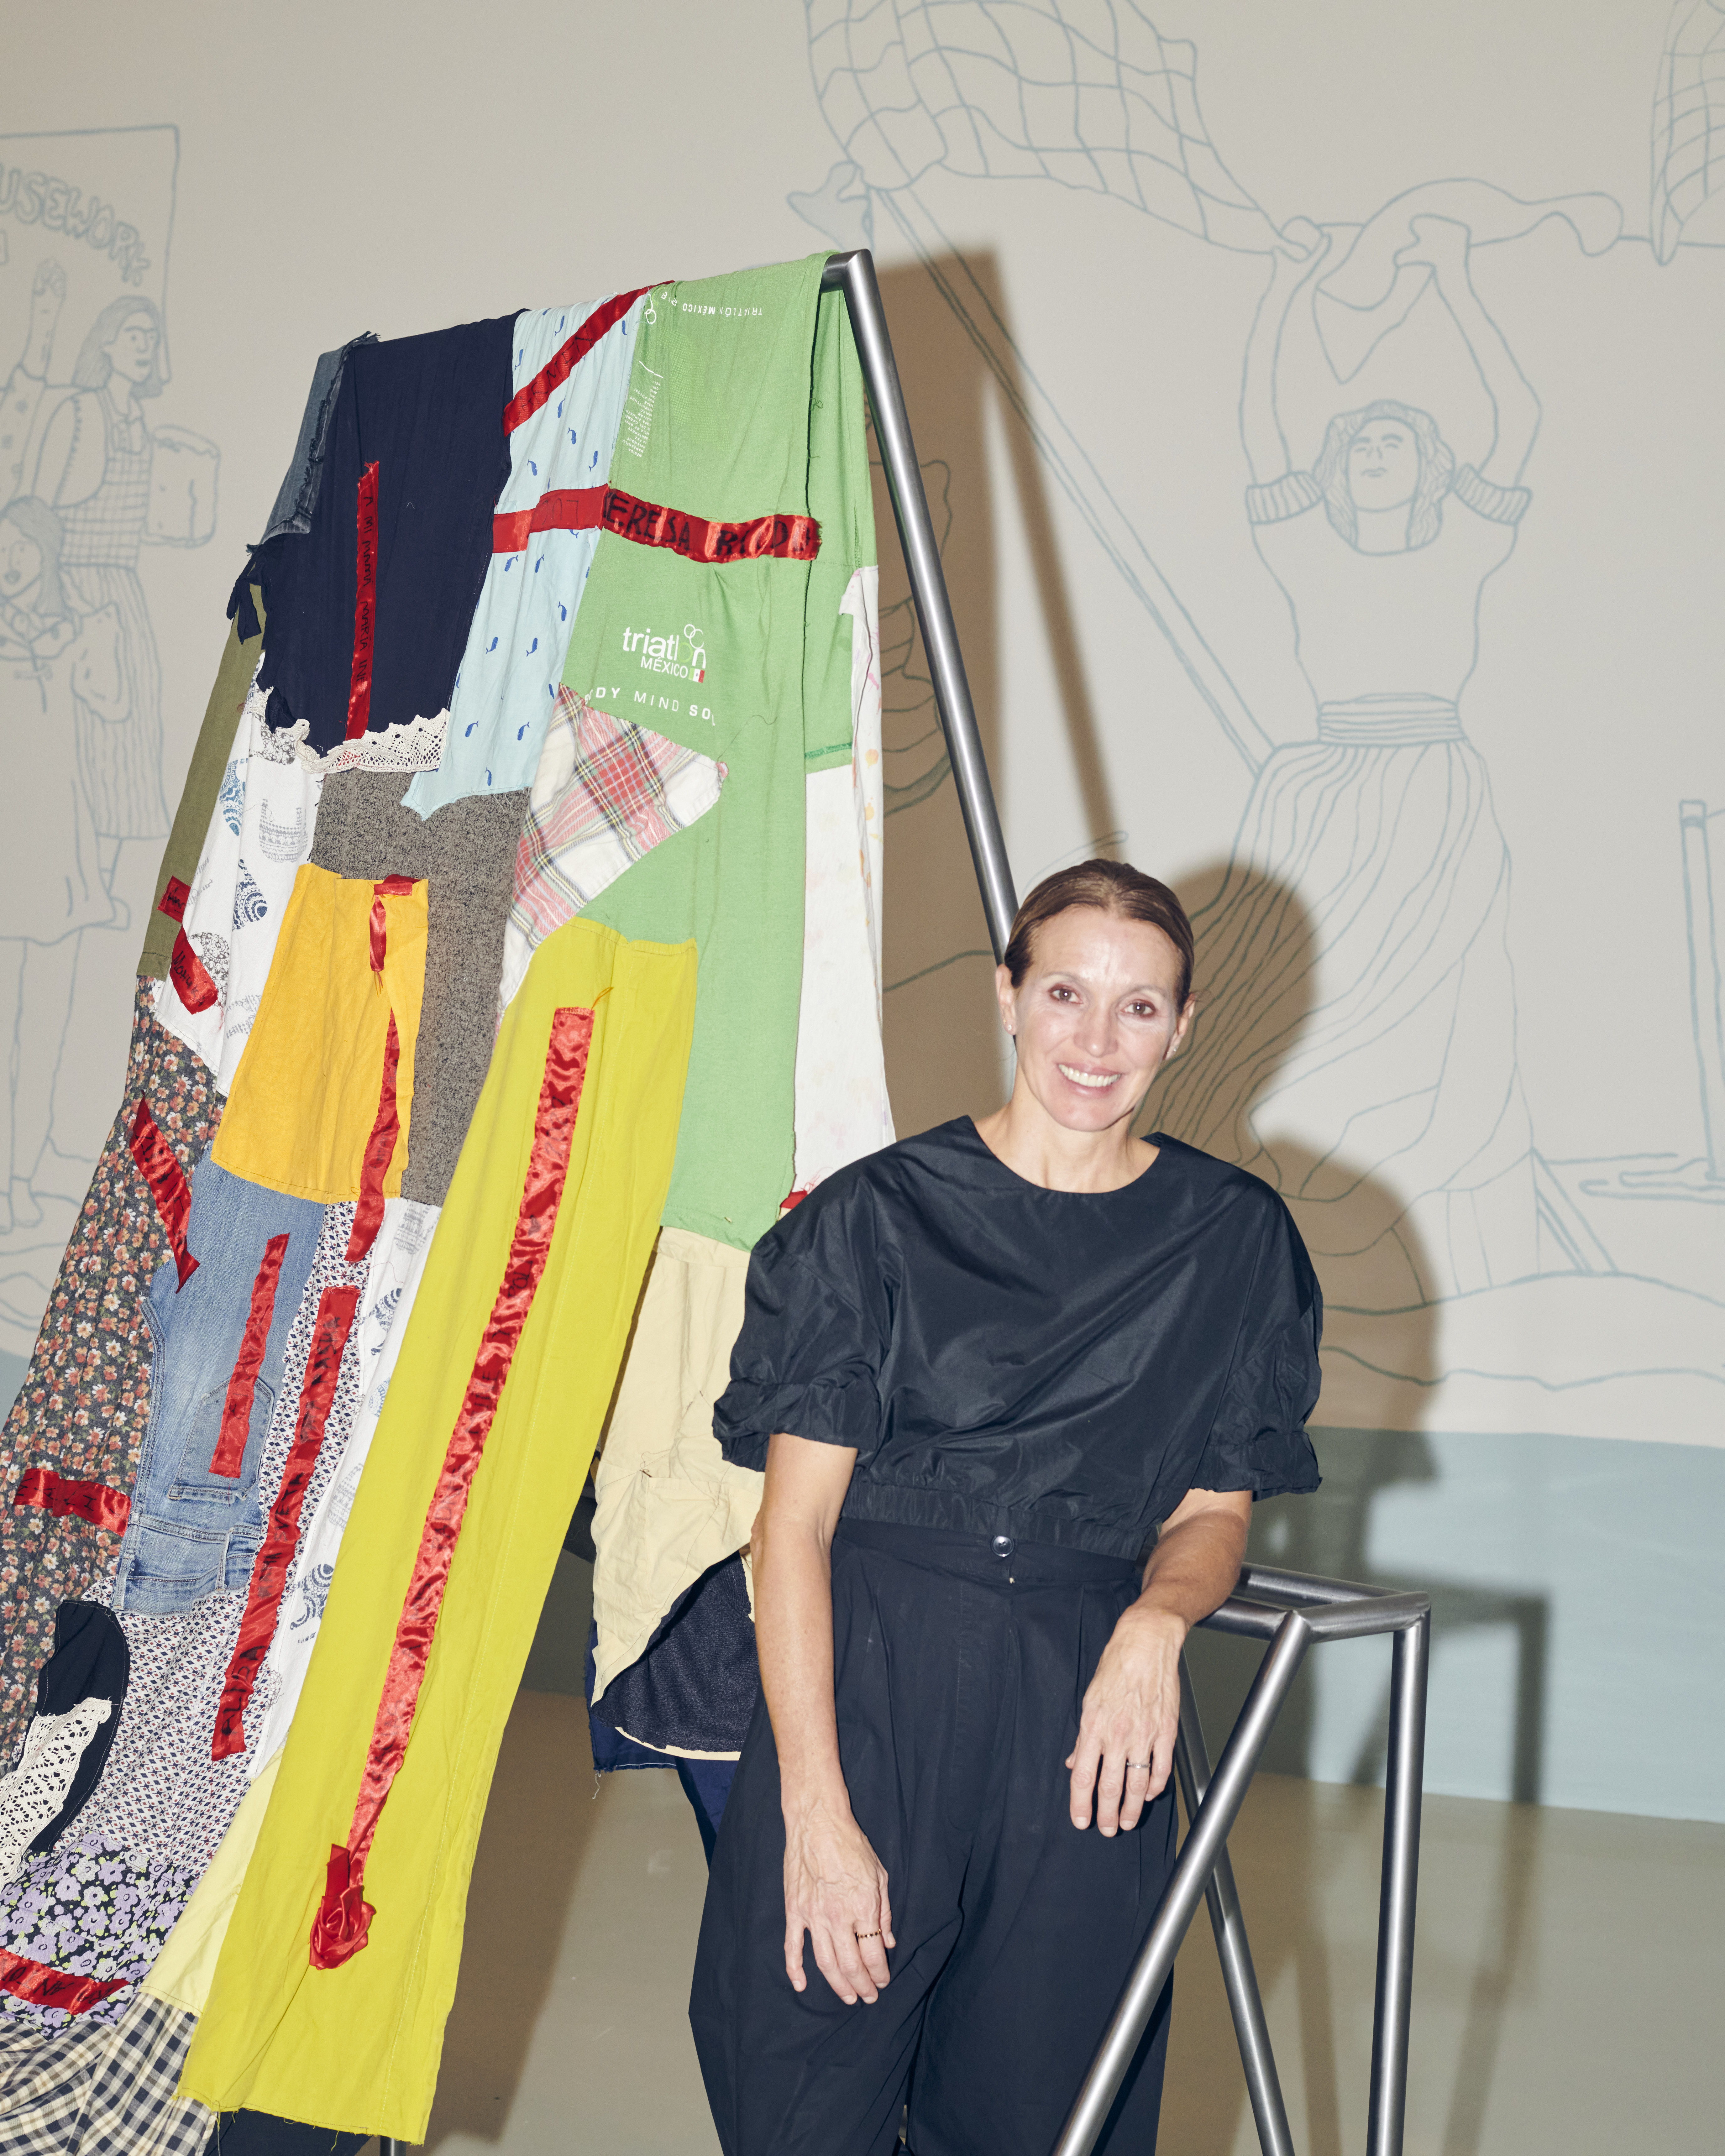 Tatiana Bilbao, Director, Tatiana Bilbao Estudio with her work La ropa sucia se lava en casa (Dirty clothes are washed at home), 2022 for the MECCA X NGV Women in Design Commission: Tatiana Bilbao on display from 6 October 2022 – 29 January 2023 at NGV International, Melbourne. Photo: Josh Robenstone